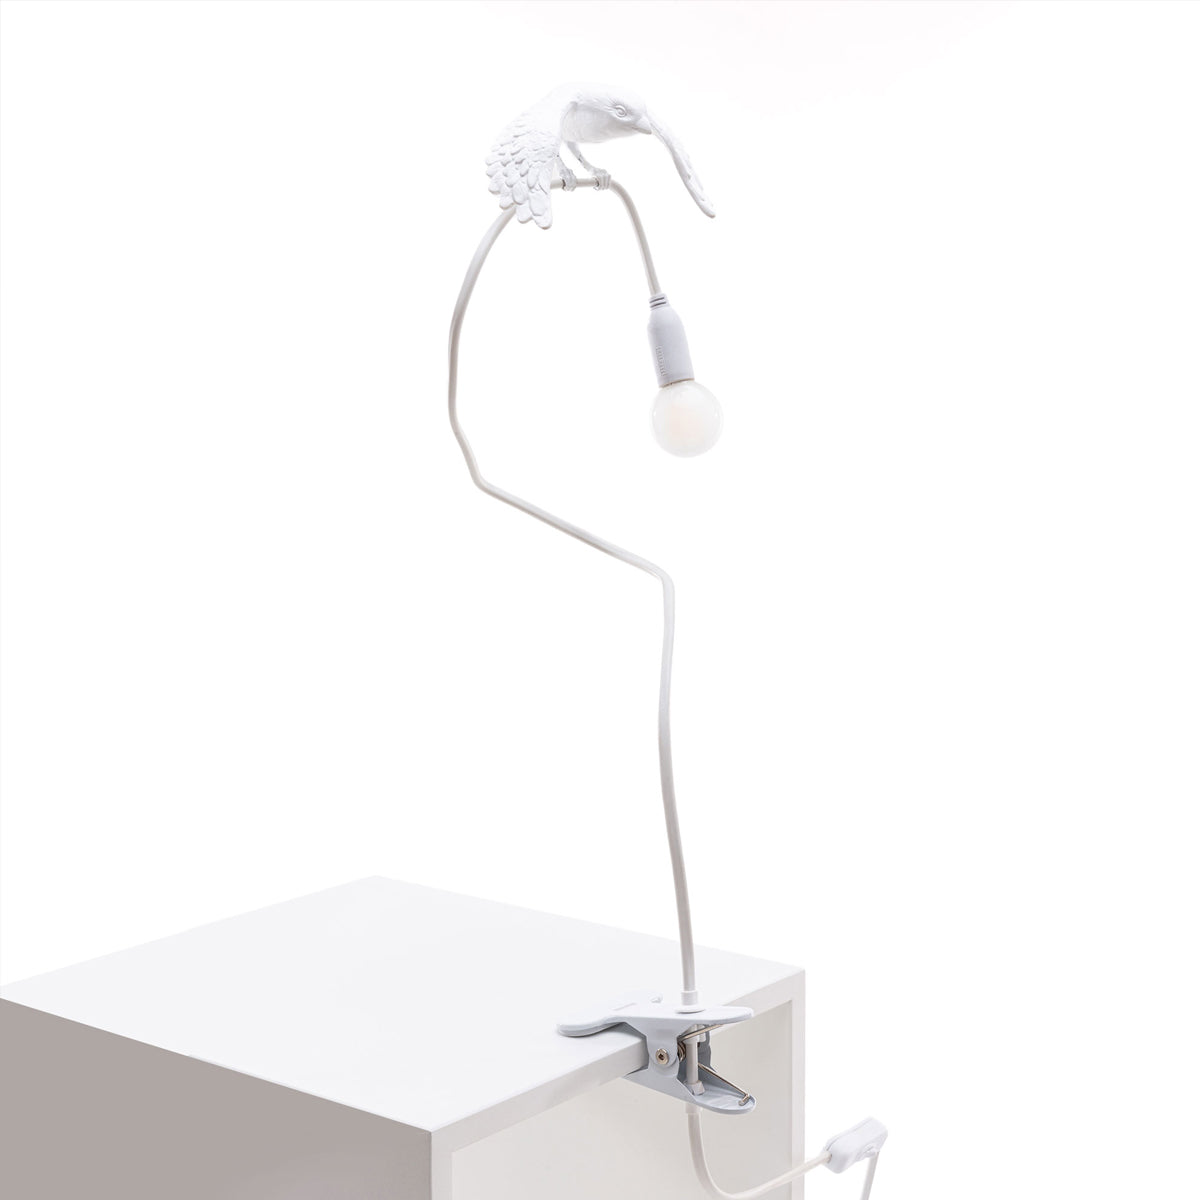 Sparrow Lamp - Taking Off